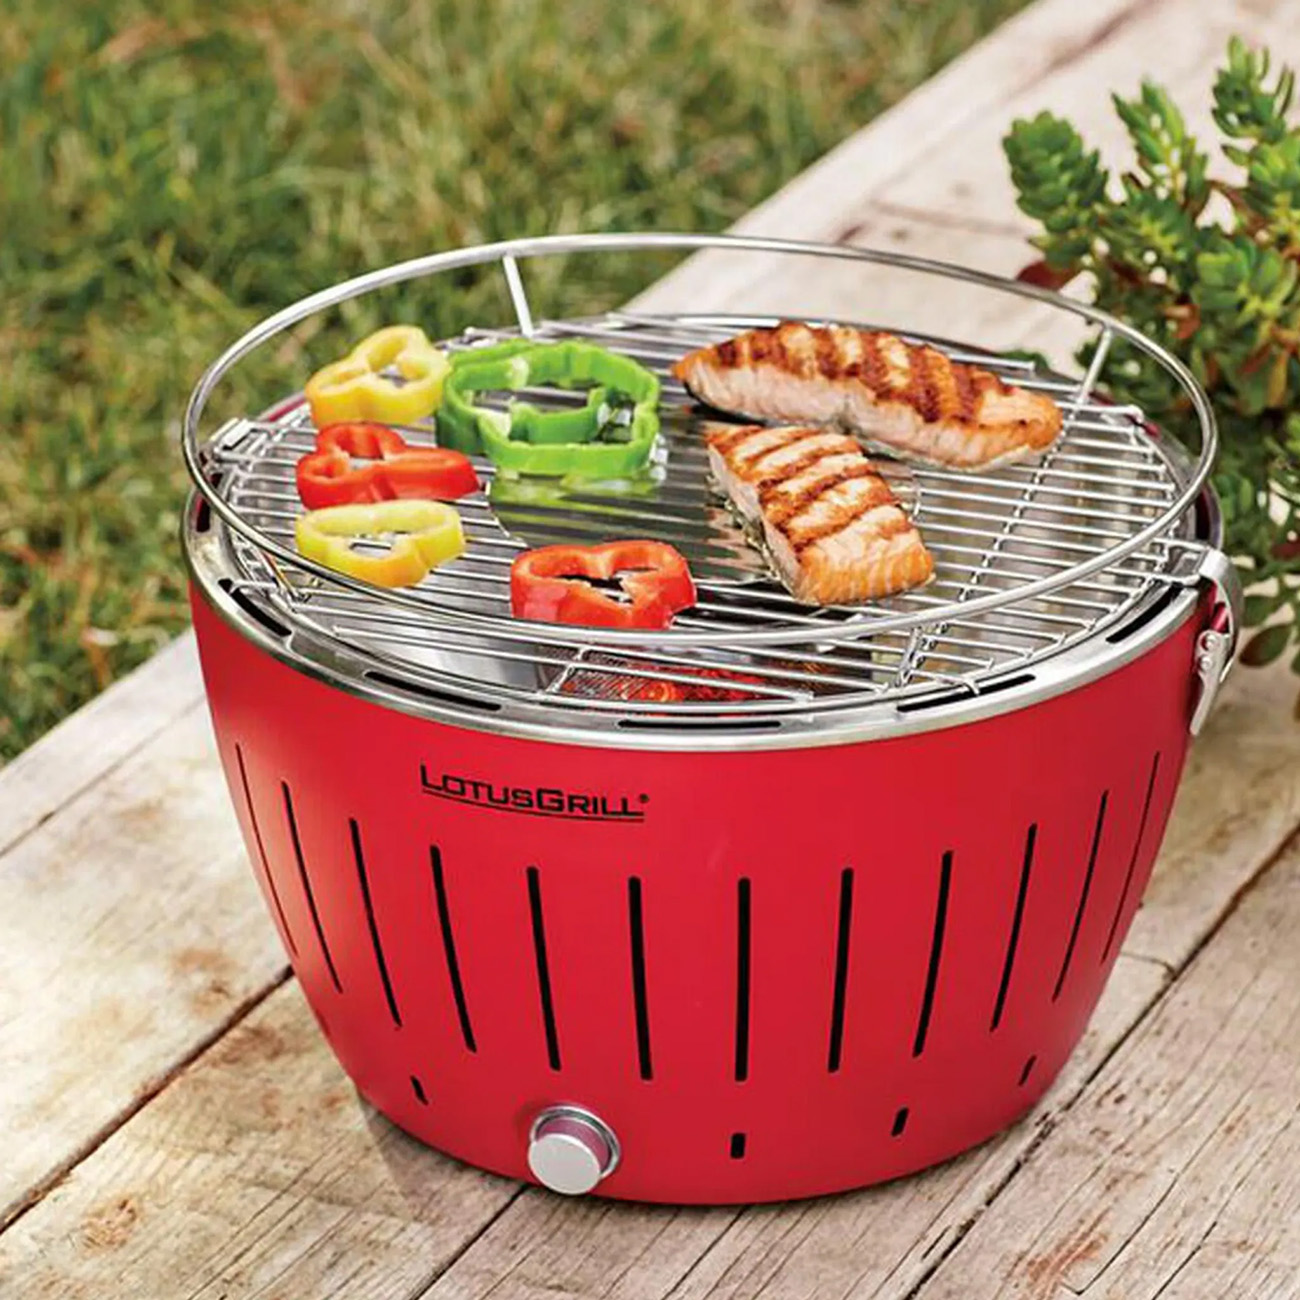 G-34P LOTUSGRILL Holzkohlegrill, rot